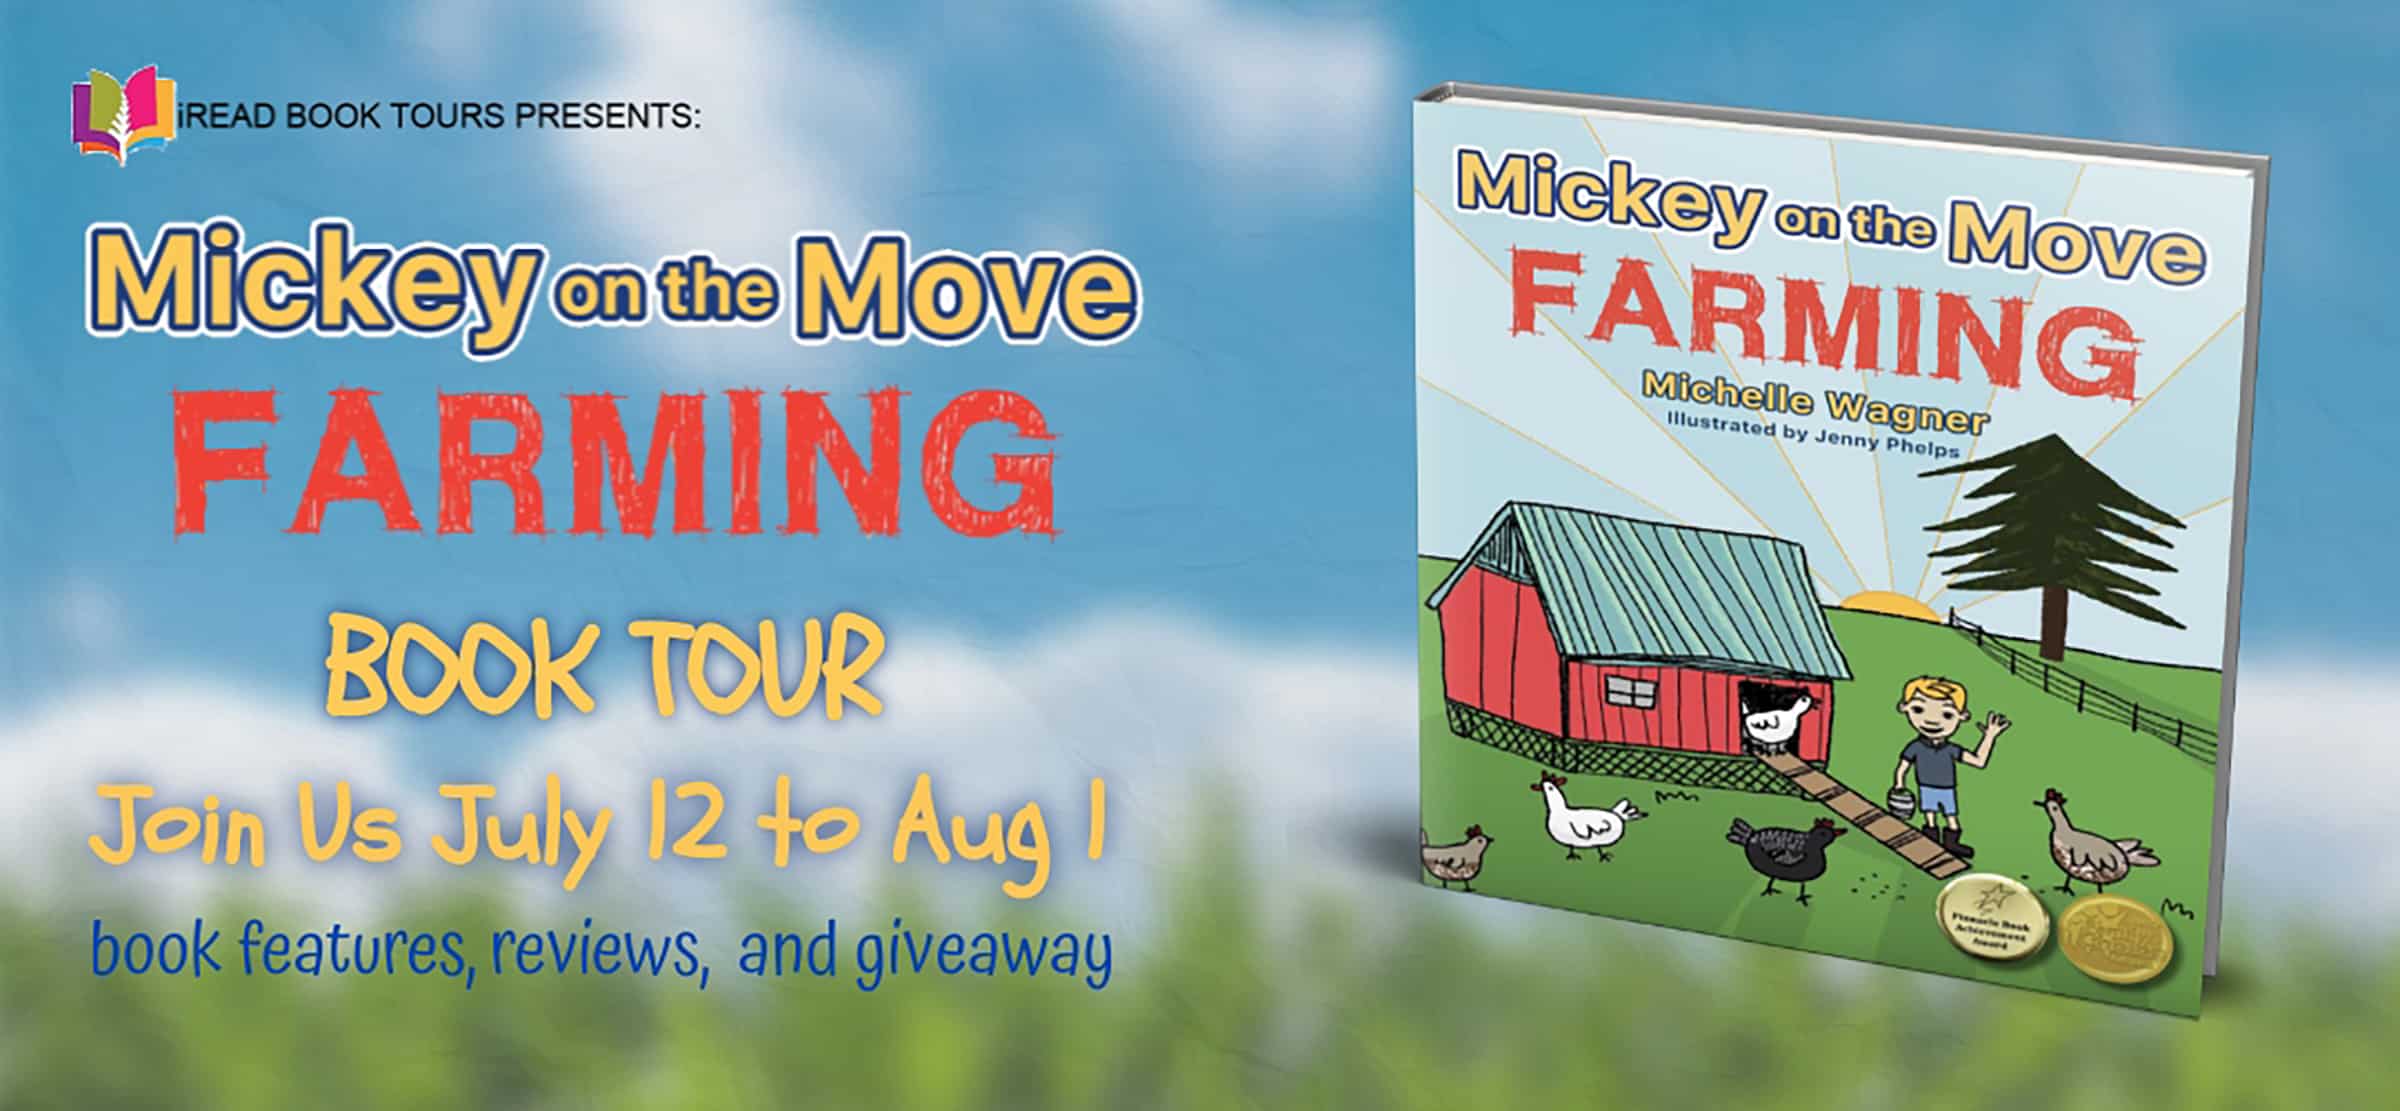 Mickey on the Move: Farming by Michelle Wagner | Review & Giveaway (ends Aug 8, 2022)